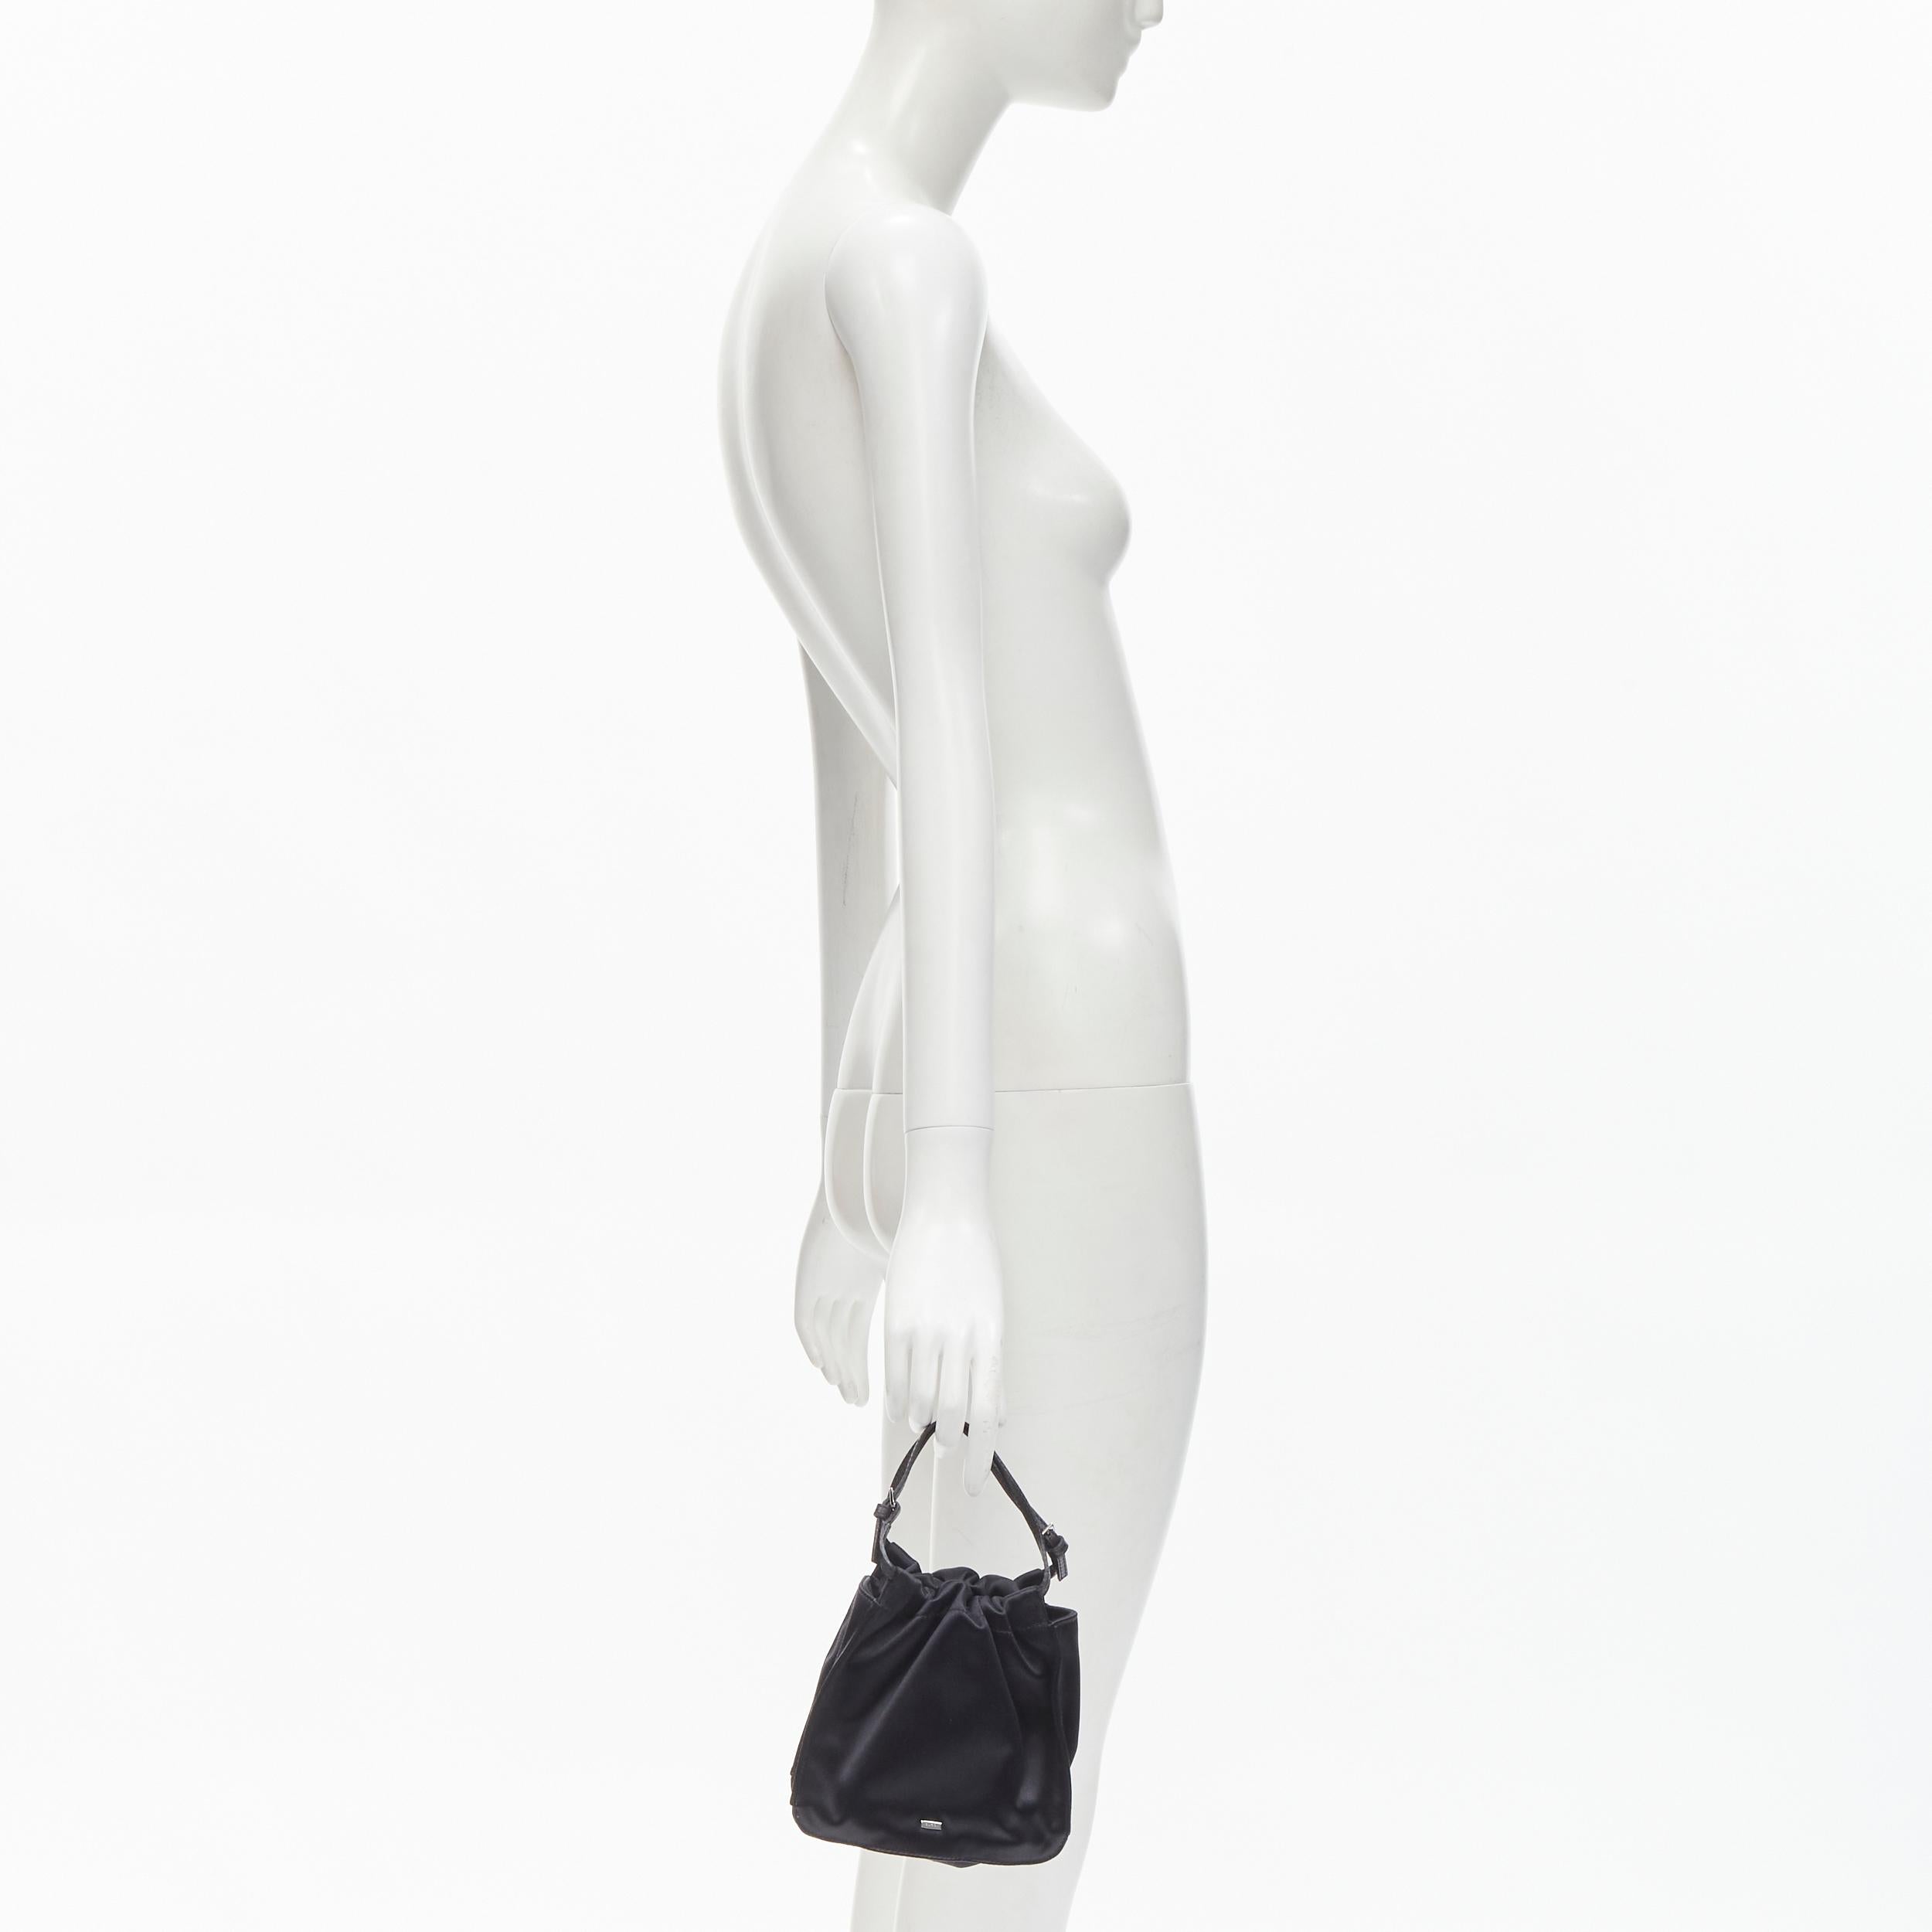 GUCCI TOM FORD black gathered silk satin minimal leather handle bucket bag
Brand: Gucci
Designer: Tom Ford
Material: 100% Silk
Color: Black
Pattern: Solid
Closure: Drawstring
Extra Detail: Gathered pleat along opening. Fine minimal laether handle